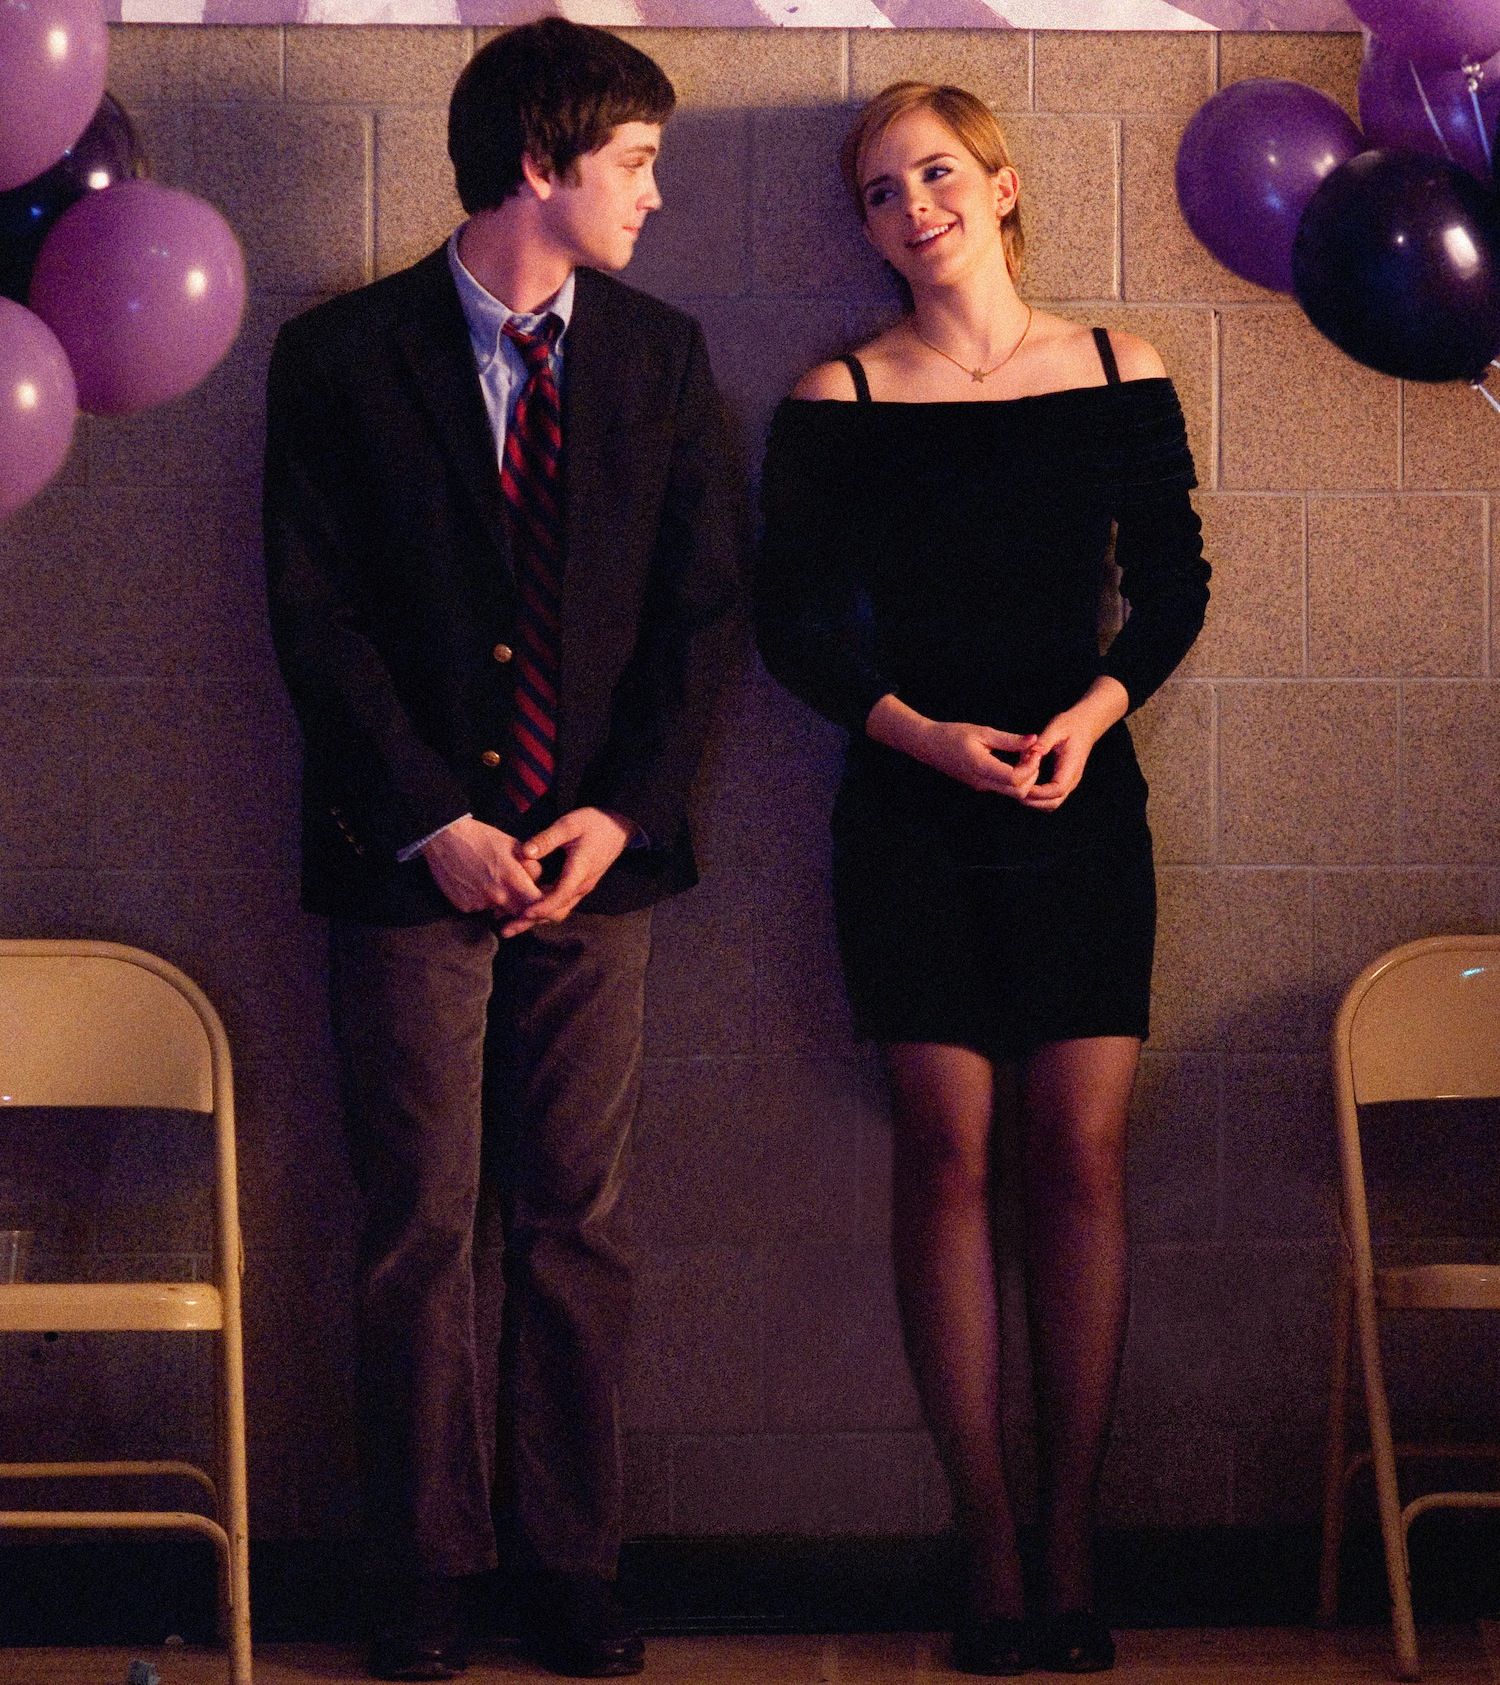 The Perks Of Being A Wallflower Photo #1